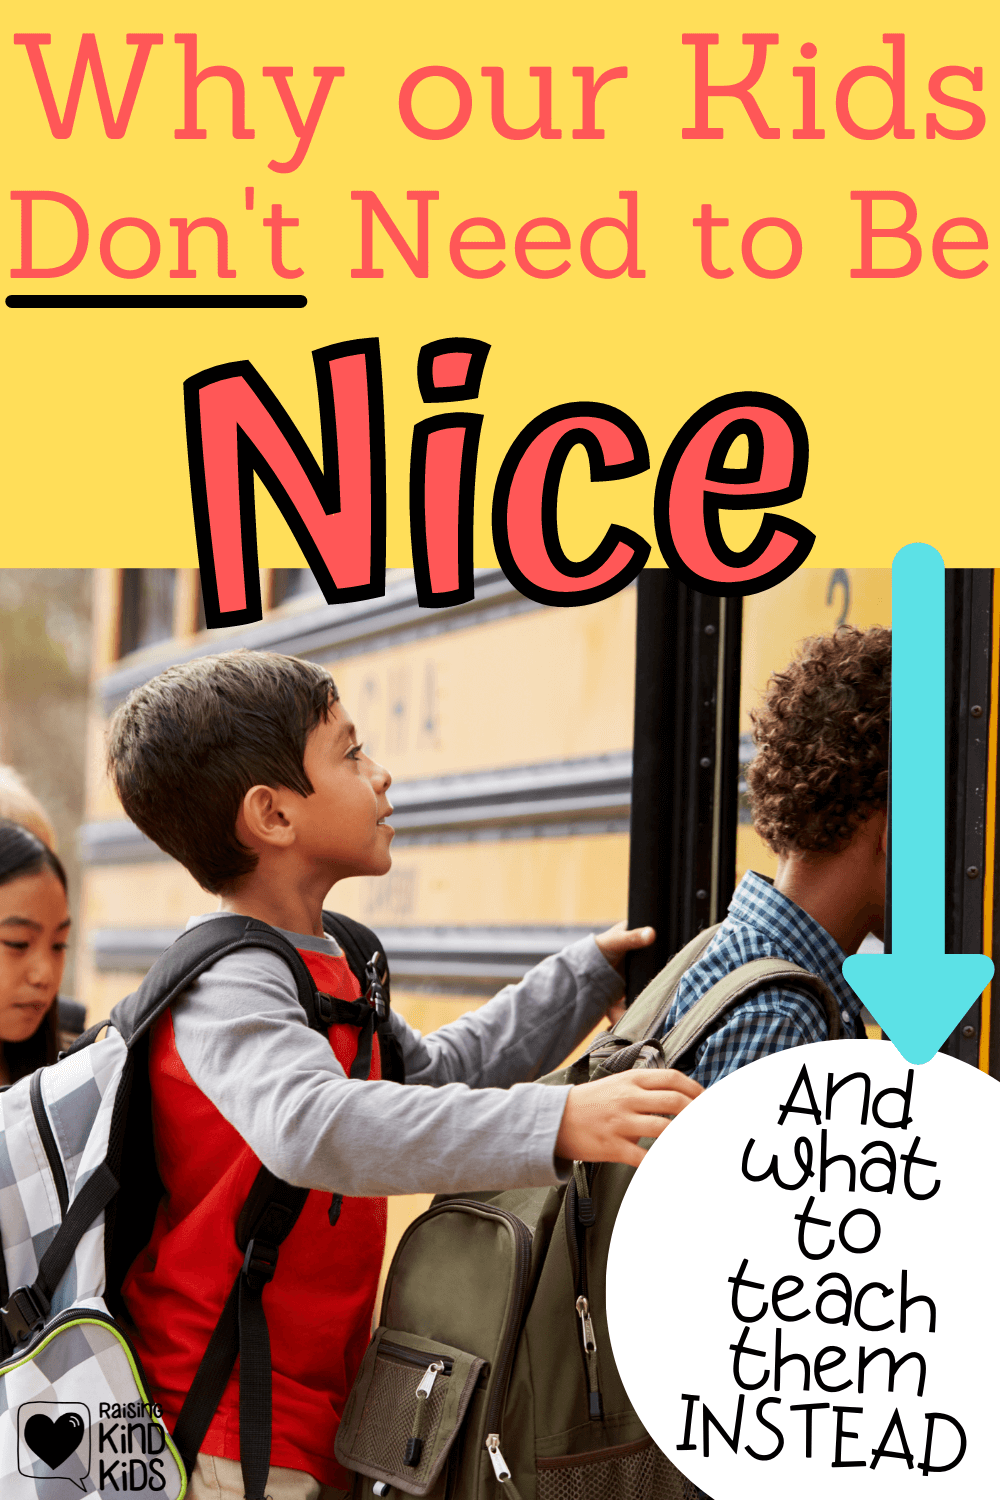 That's right. We should NOT be raising nice kids. But we should be doing this instead to raise our kids to be the best version of themselves. This parenting advice will help teach your kids to be happier too! #parenting #parentingadvice #coffeeandcarpool #positiveparenting #raisingkindkids #kindness #nicekids #nice